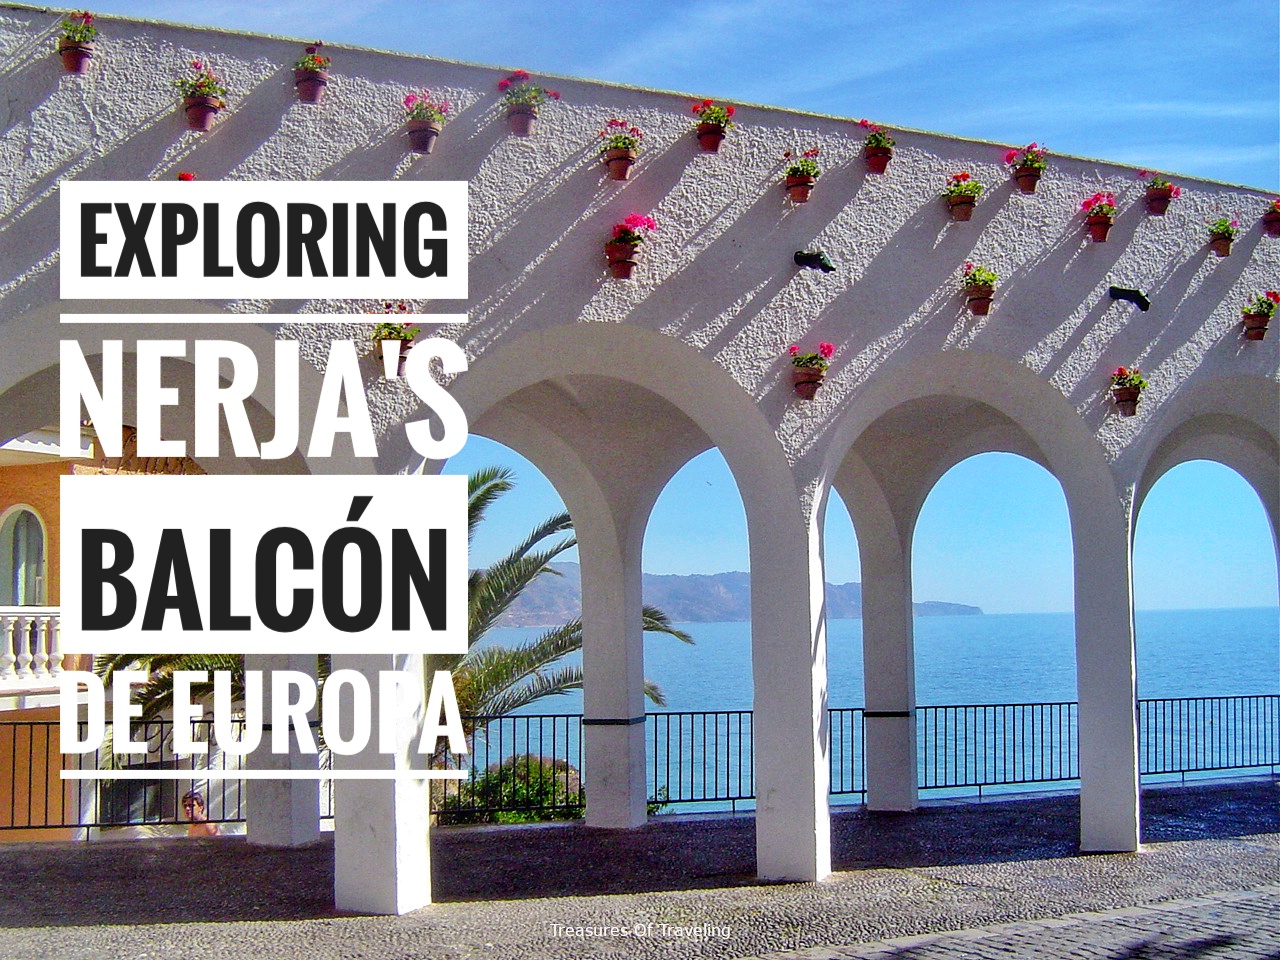 If you plan to visit Spain’s Costa del Sol, wander along Nerja’s palm-lined boardwalk, the Balcón de Europa, which has fantastic views of the Mediterranean Sea and the rugged mountains that surround it, along with the many beautiful beaches of Nerja.